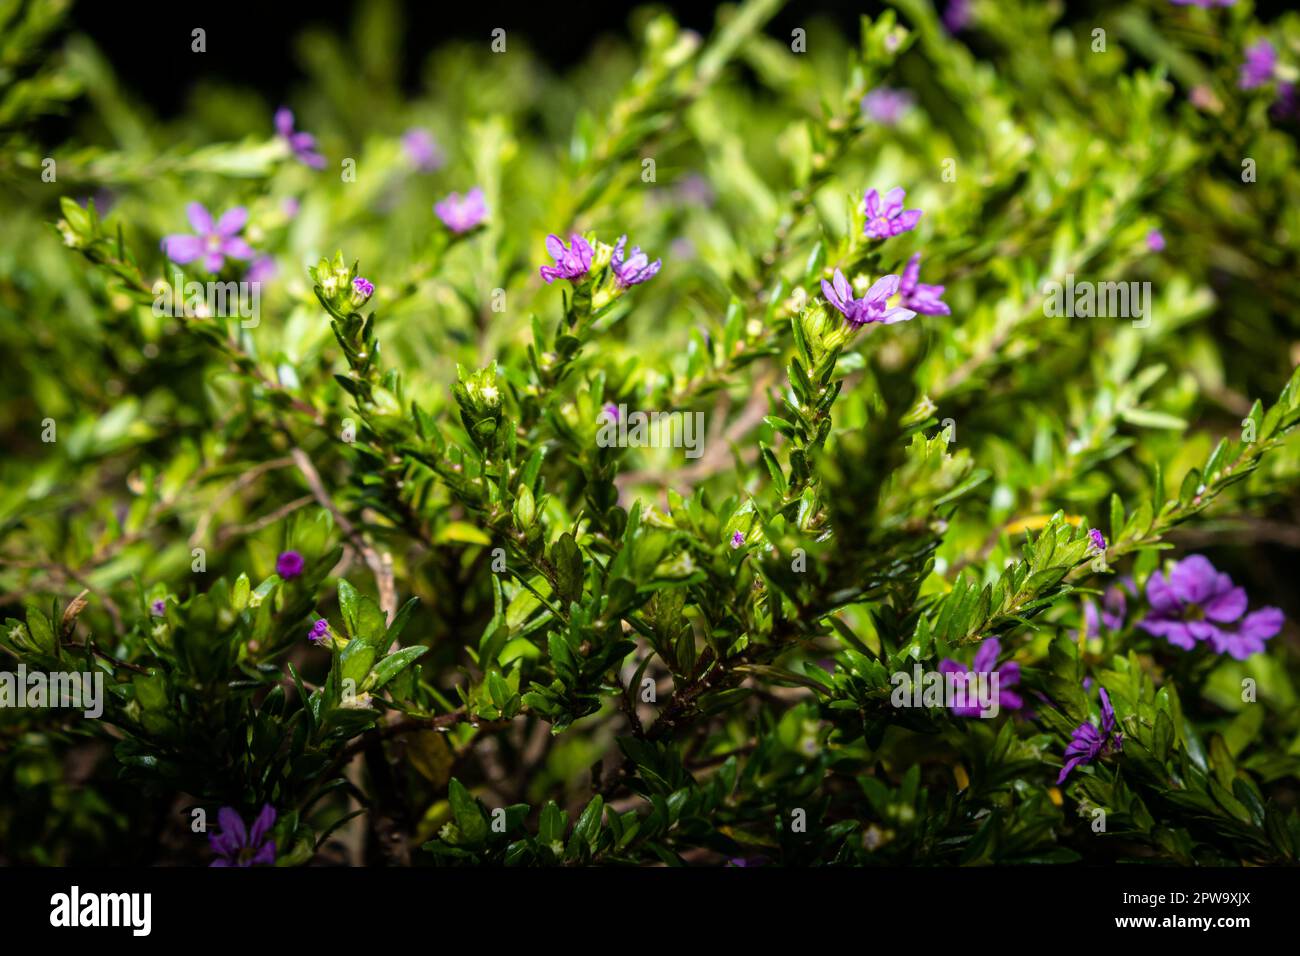 False erica rose in a garden with blurred background. Species Cuphea Hyssopifolia. Stock Photo